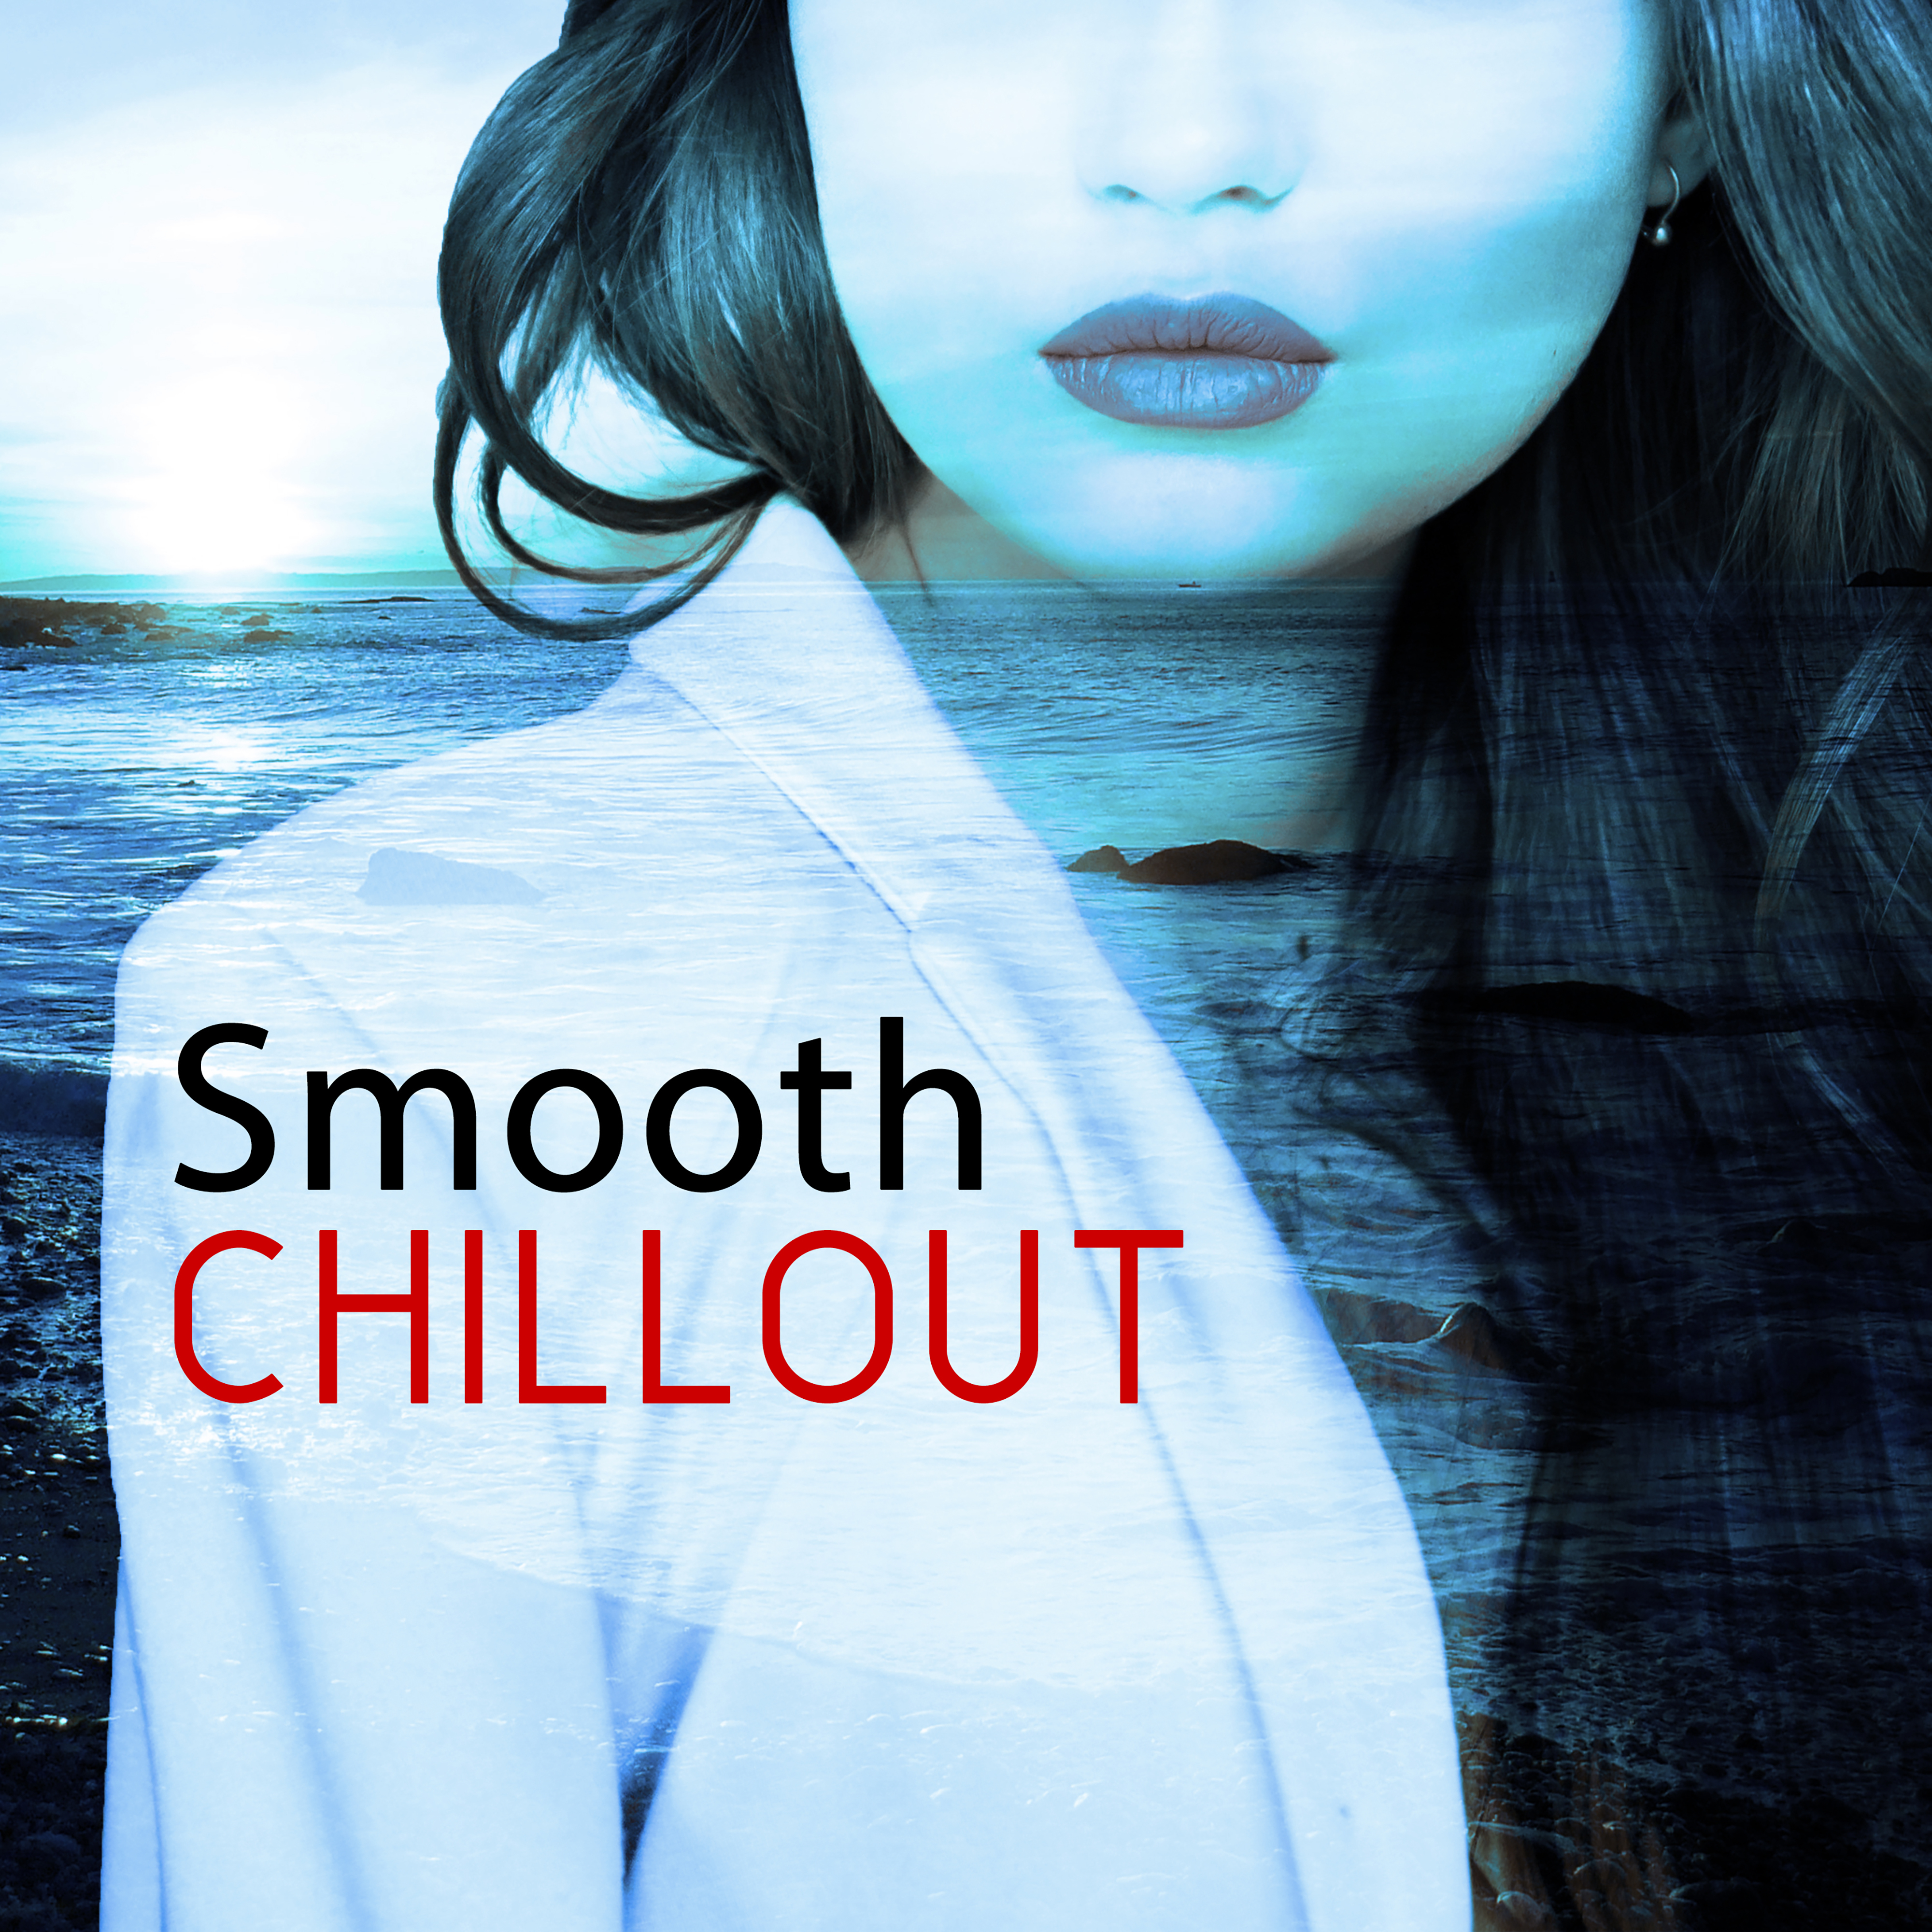 Smooth Chillout – Sensual Relax, Deep Meditation, Ibiza Lounge, Rest on the Beach, Summertime